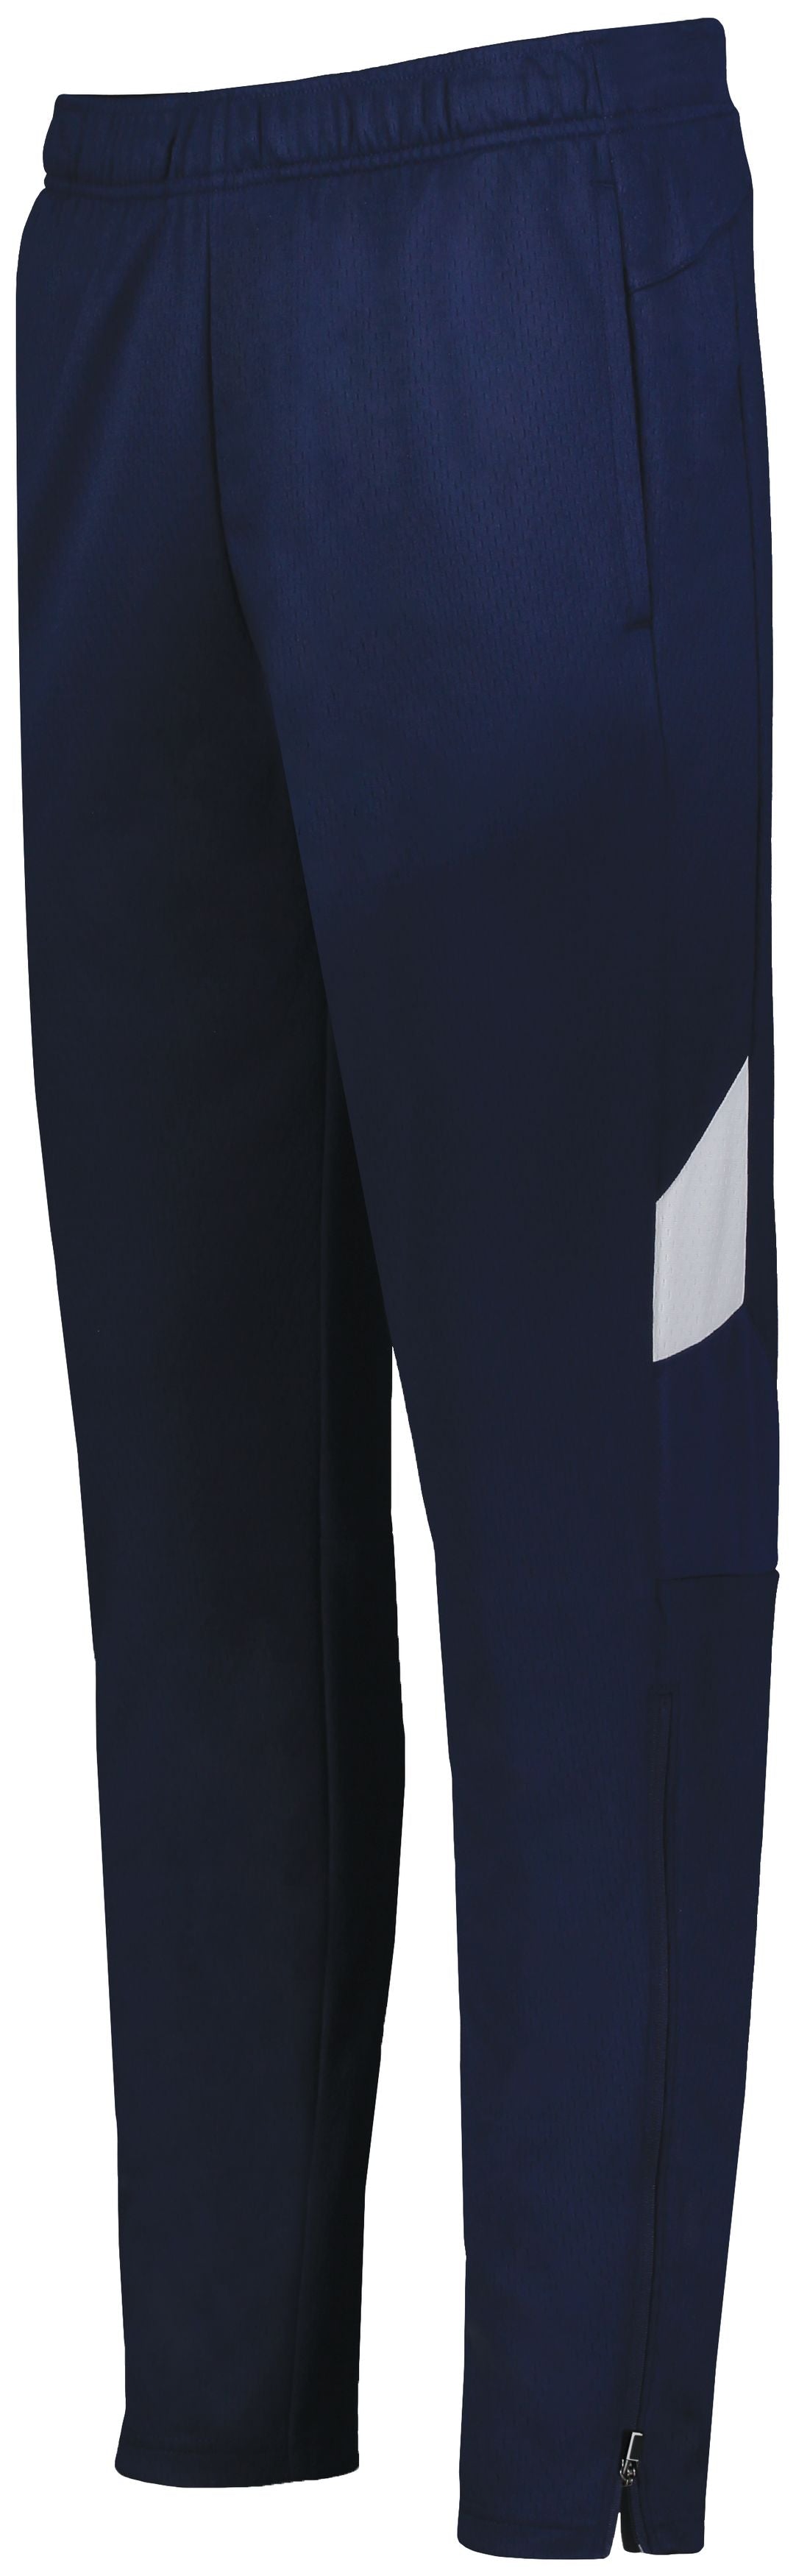 Youth Limitless Pant 229680